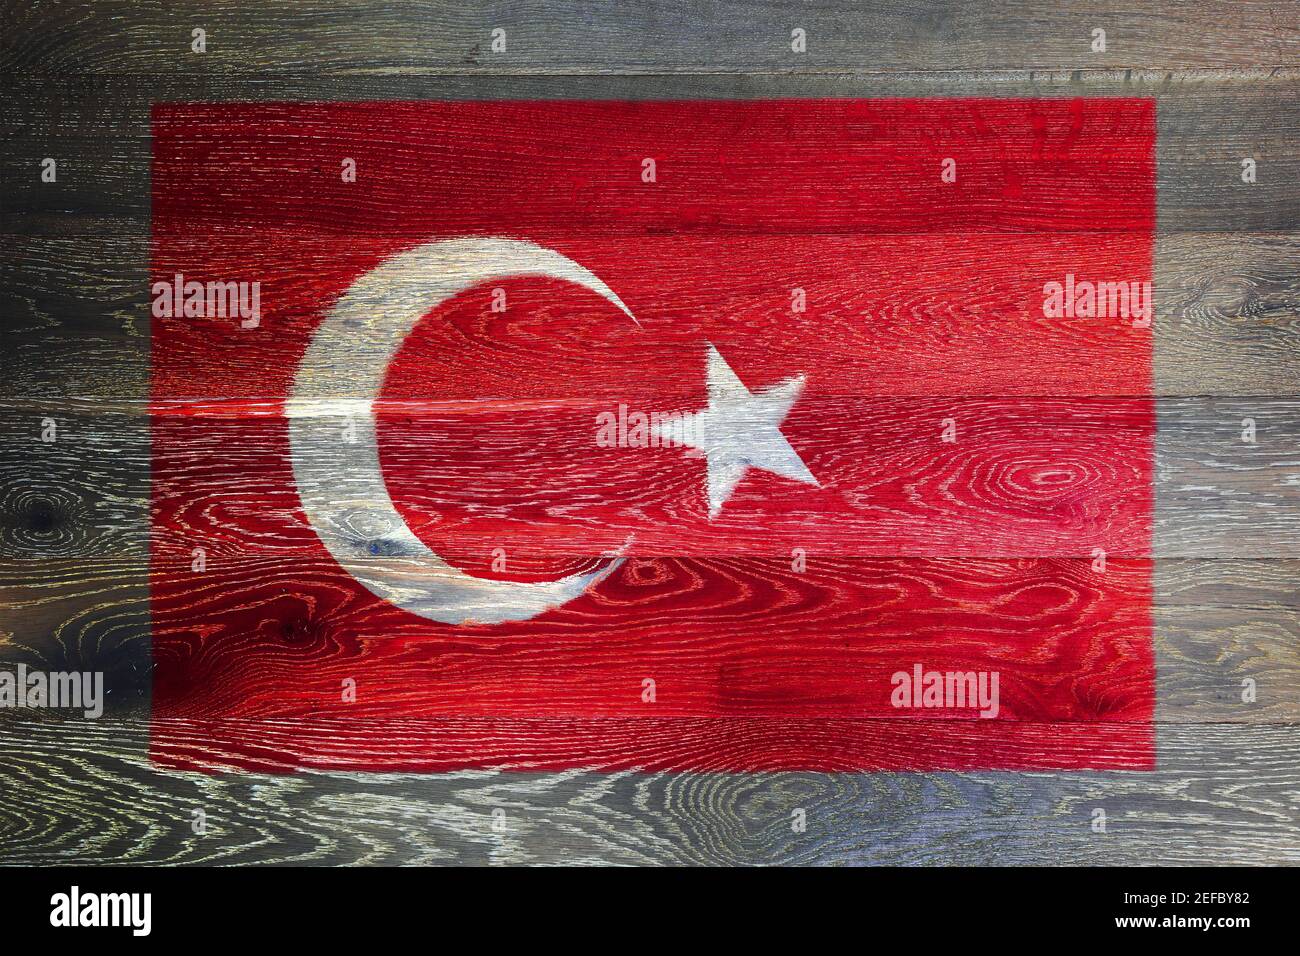 Turkey flag on rustic old wood surface background Stock Photo